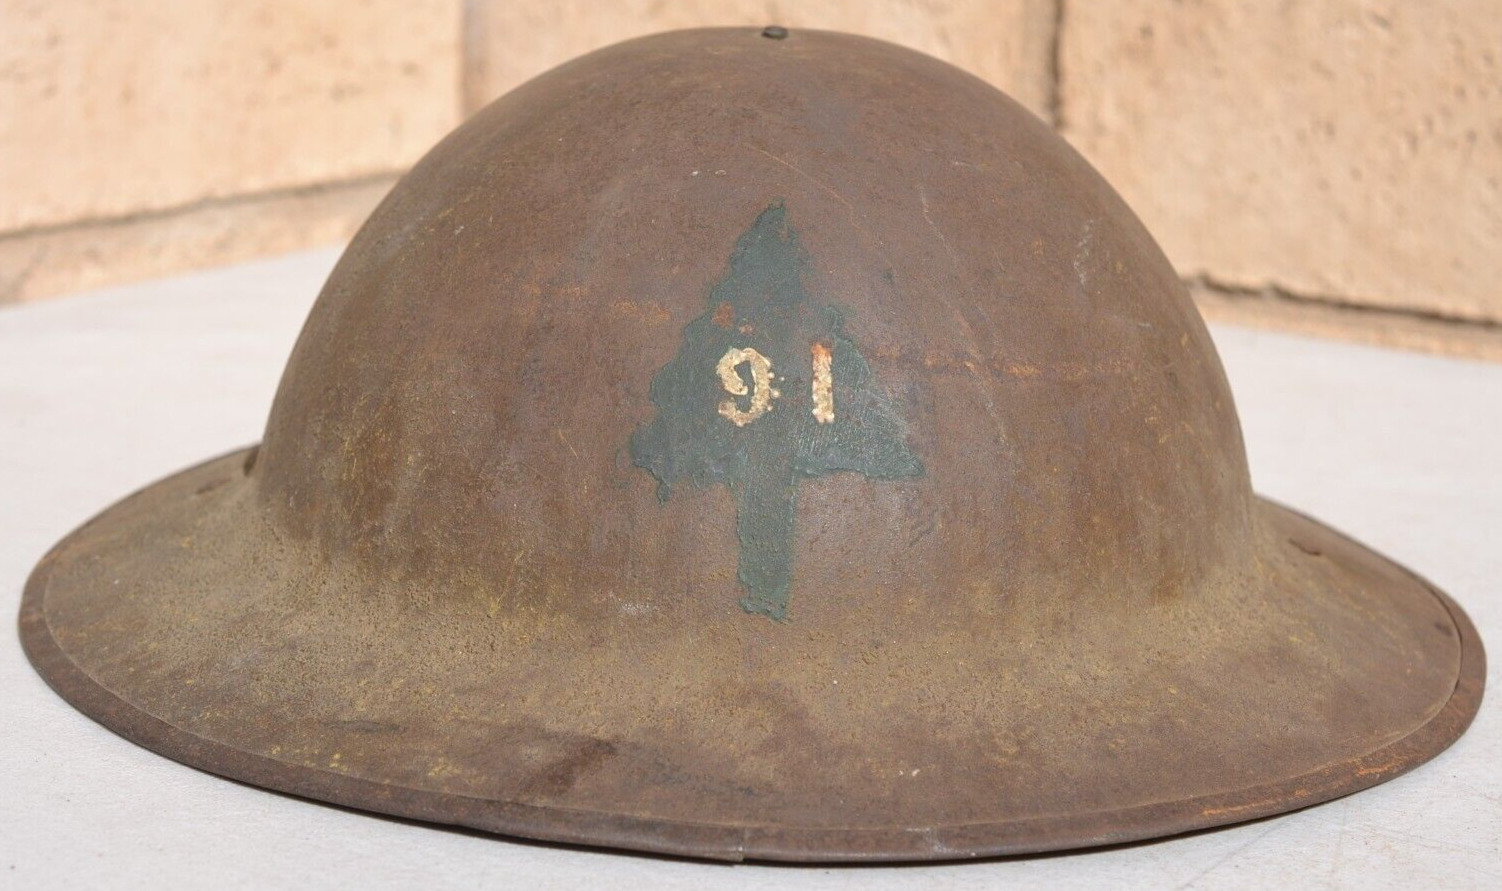 US ARMY WWI US AEF 91st INFANTRY DIVISION HELMET BRITISH MADE GREAT ORIGINAL 